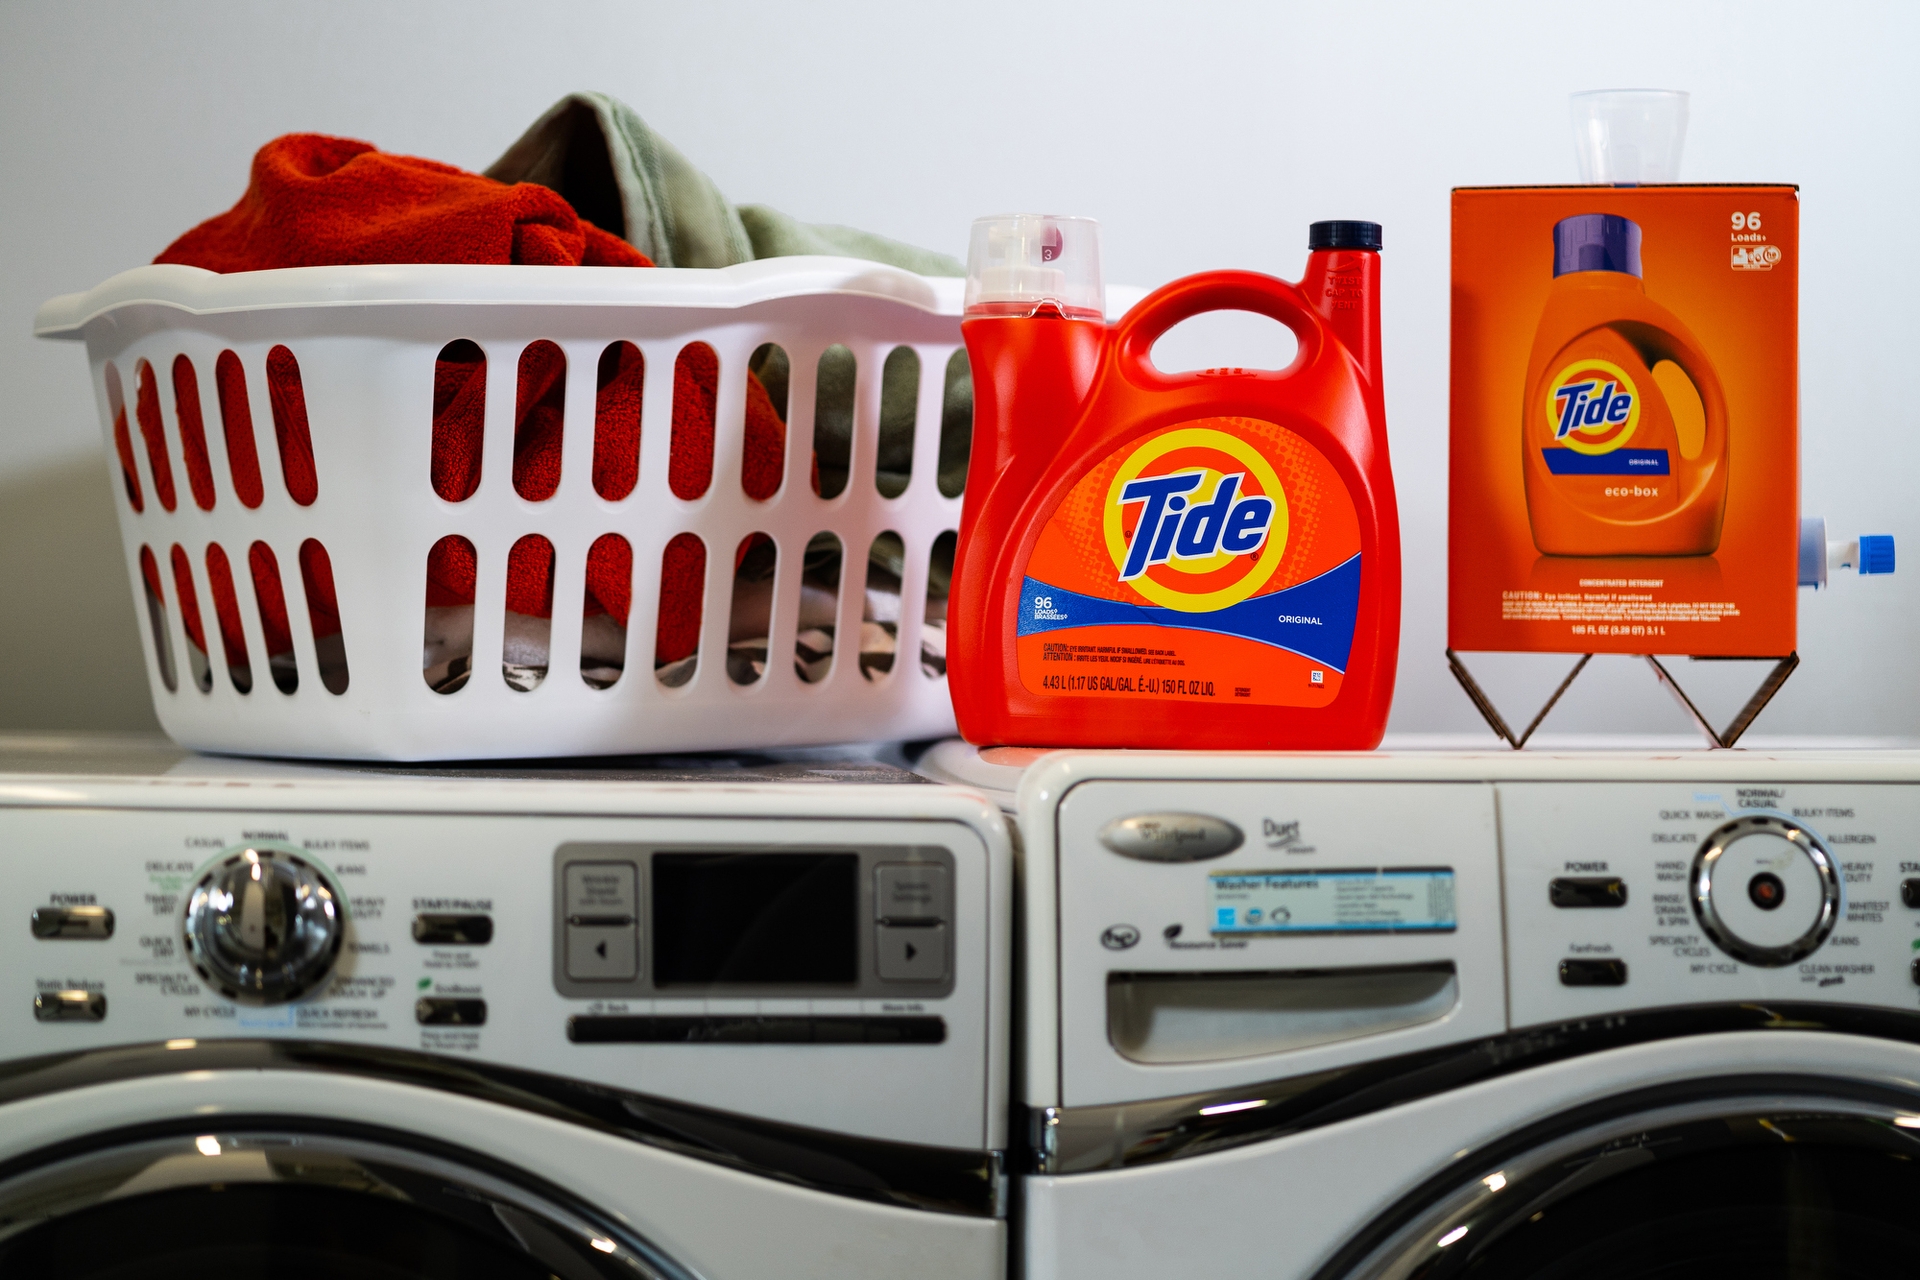 A basket of laundry sits atop a washer and dryer. Next to the laundry basket there are two containers of Tide laundry detergent. One is made of plastic. The other is made of cardboard and sits atop two triangular legs.